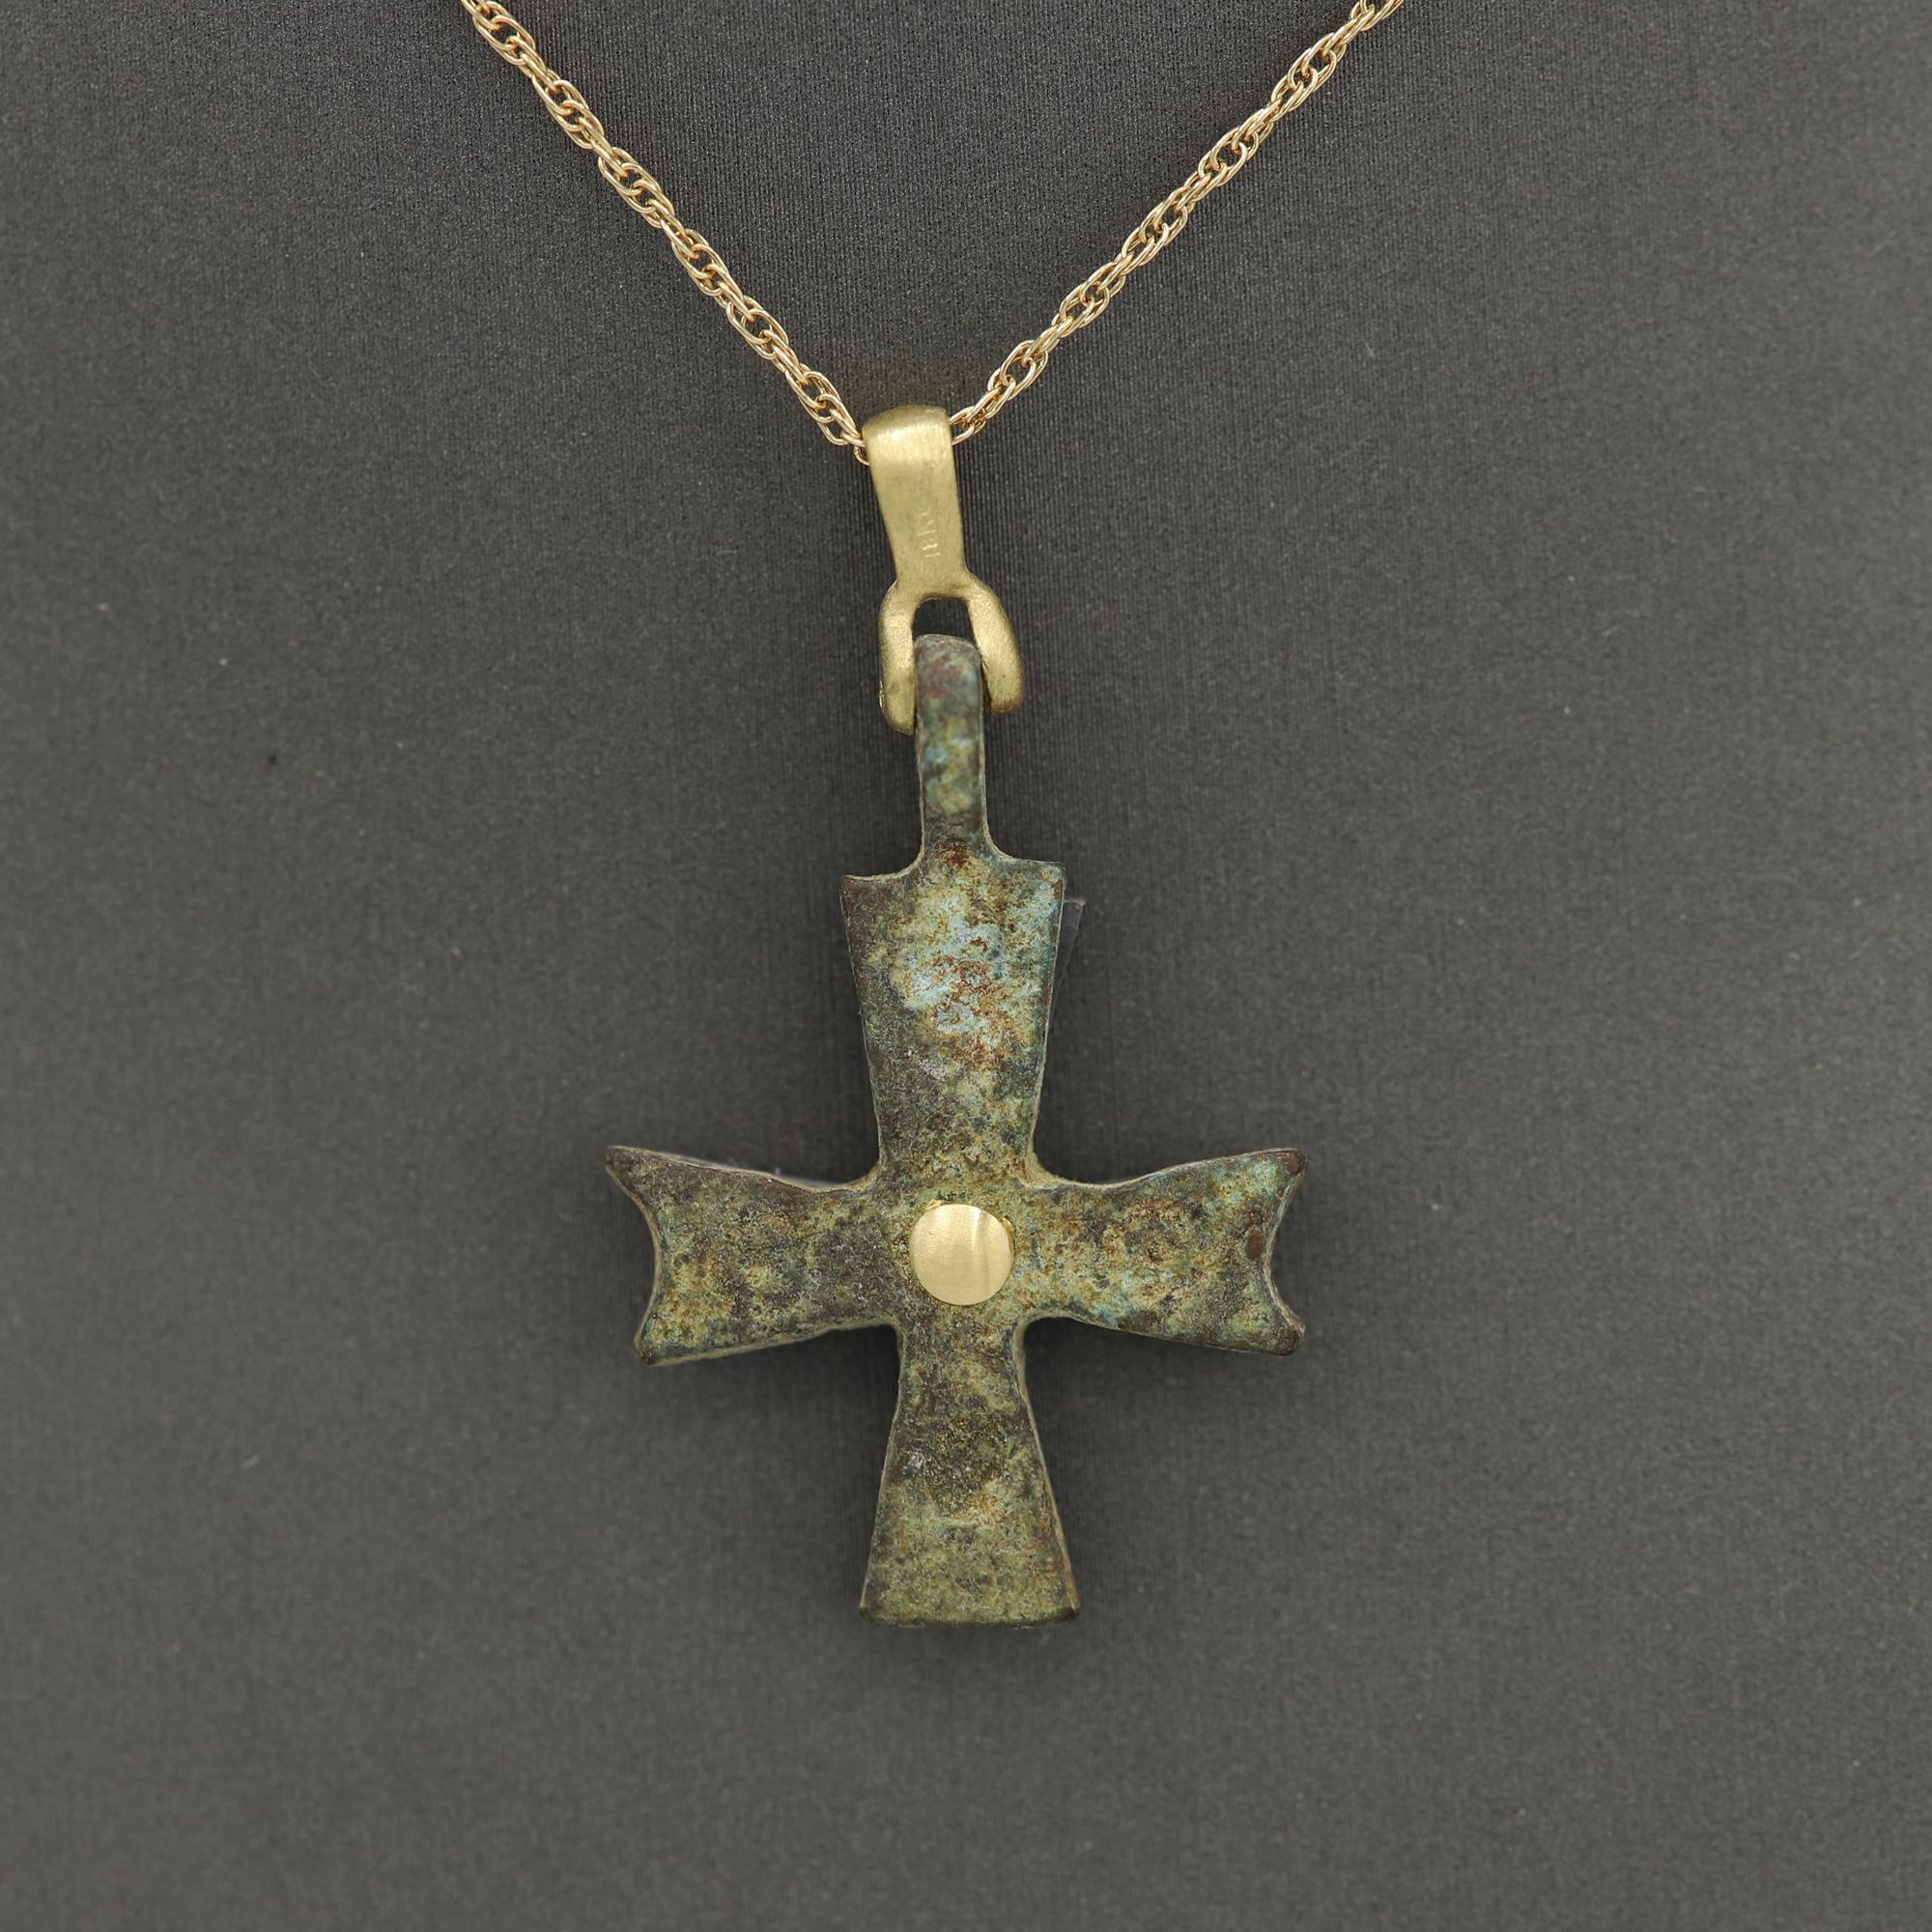 Magnificent piece of History - can be yours today !
Ancient Byzantine Period cross.
Hand set in Italy with 18k Yellow Gold.
Approx size 1' inch / 25 mm.
Cross is estimate from the 600-900 AD 
Rich Patina tone as a result of aged bronze.
Back side is